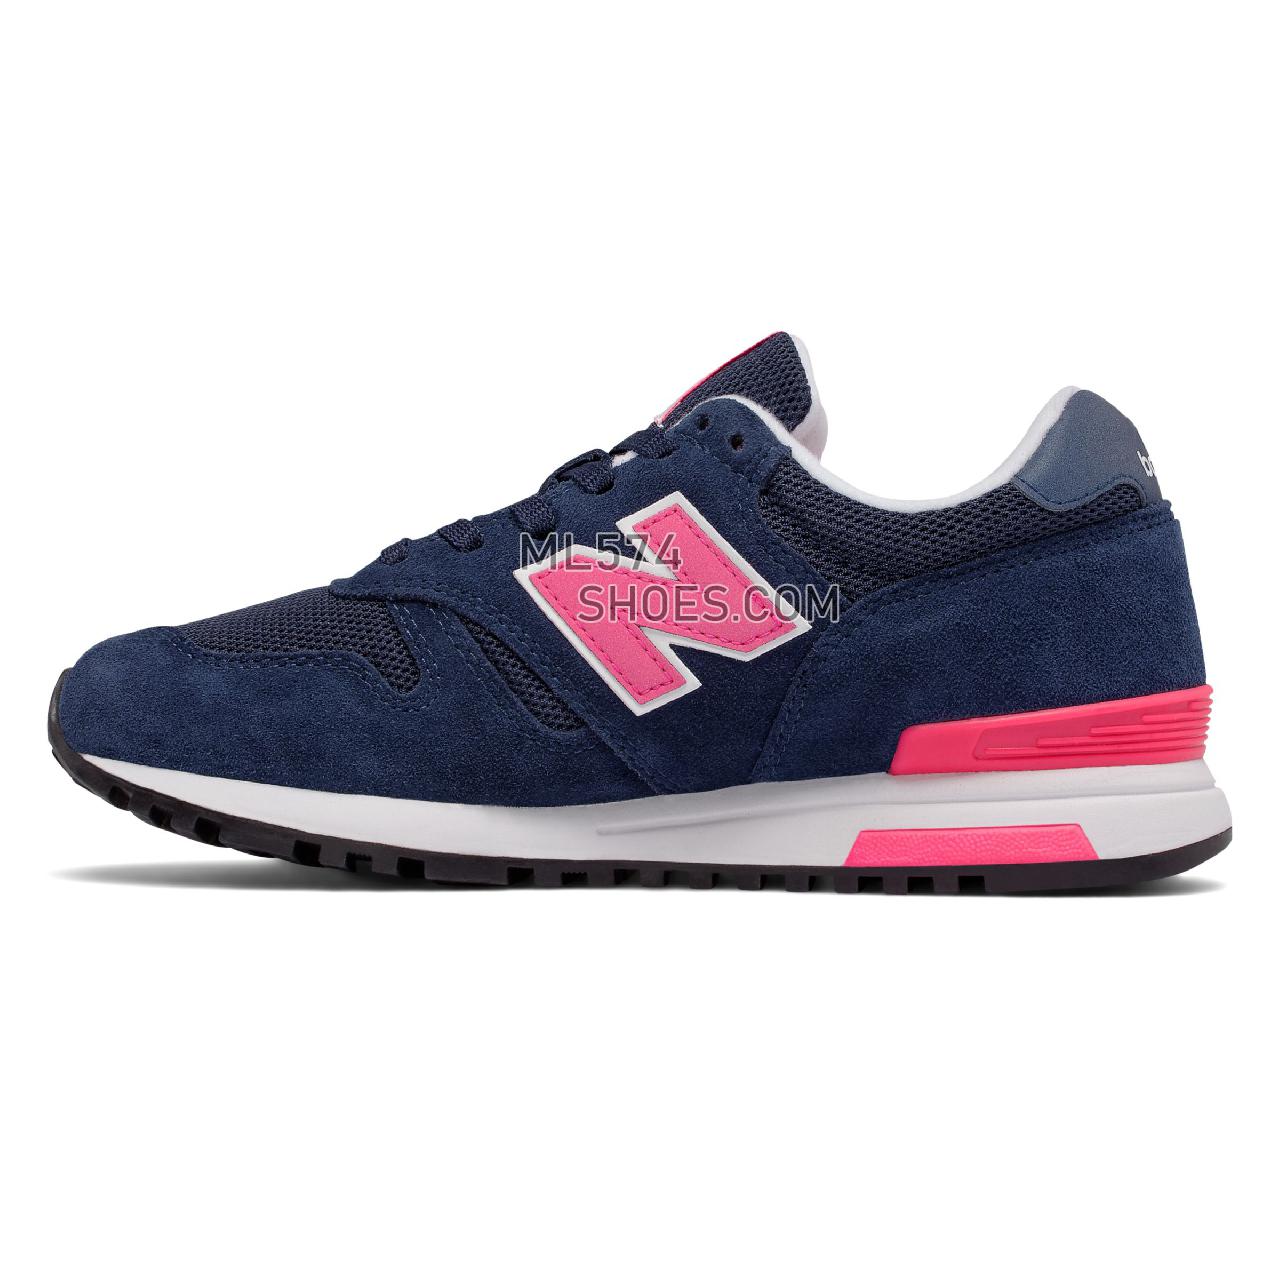 New Balance 565 - Women's Classic Sneakers - Navy with Pink - WL565NPW